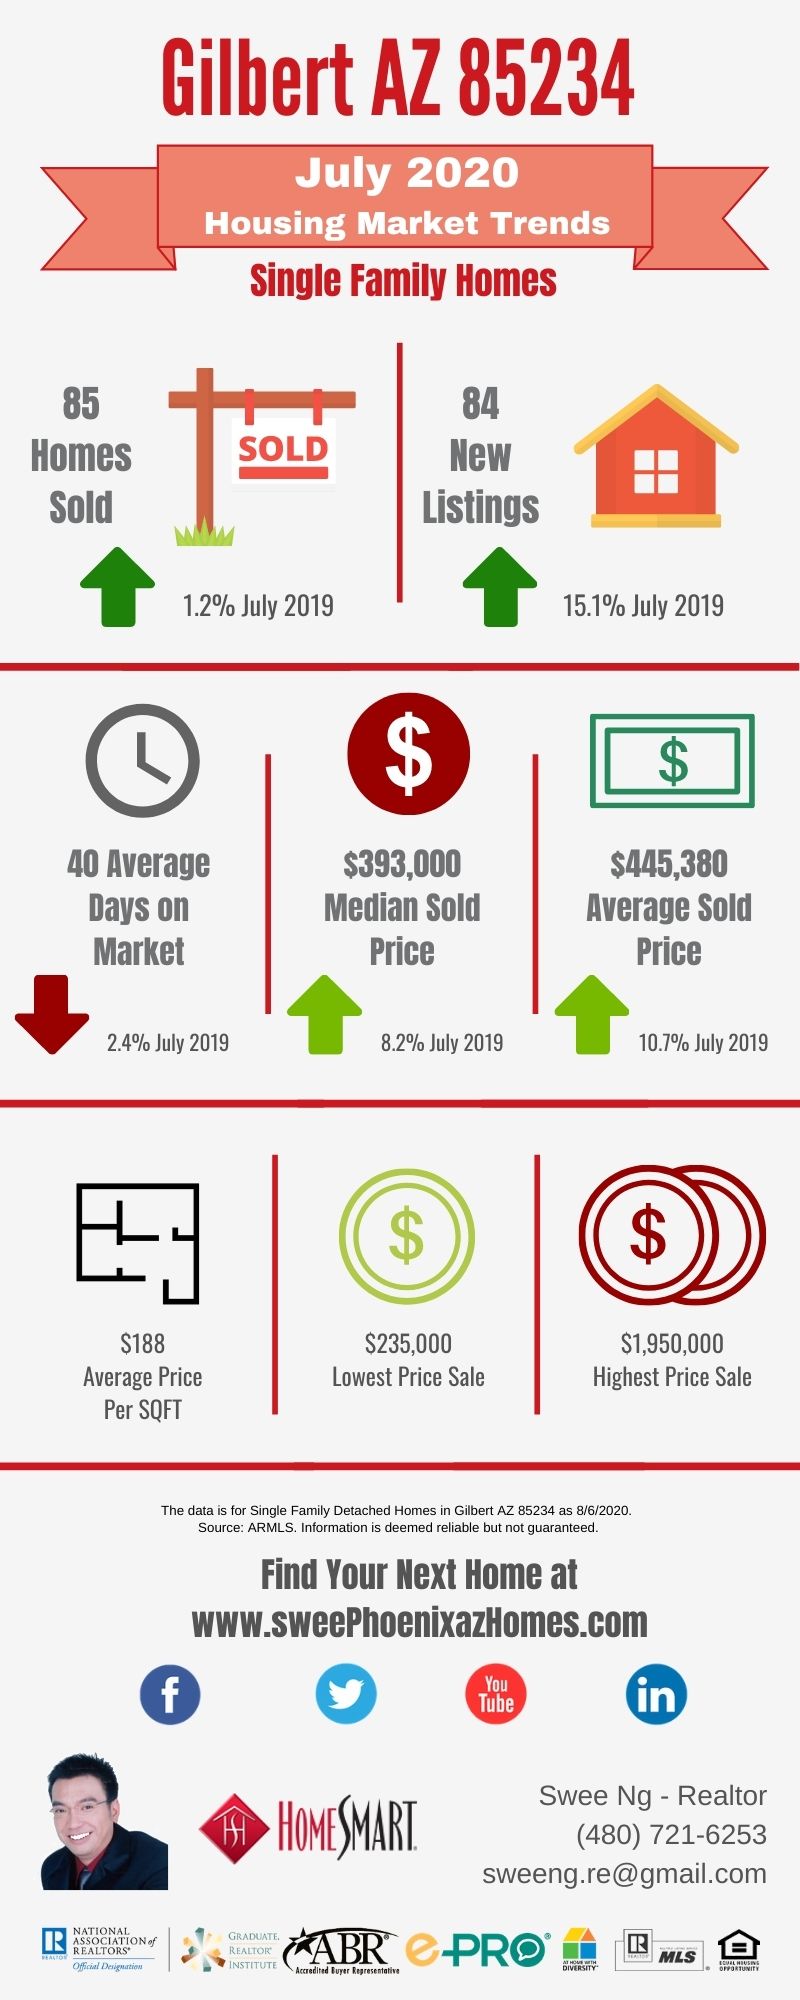 Gilbert AZ 85234 Housing Market Trends Report July 2020 by Swee Ng, Real Estate and House Value